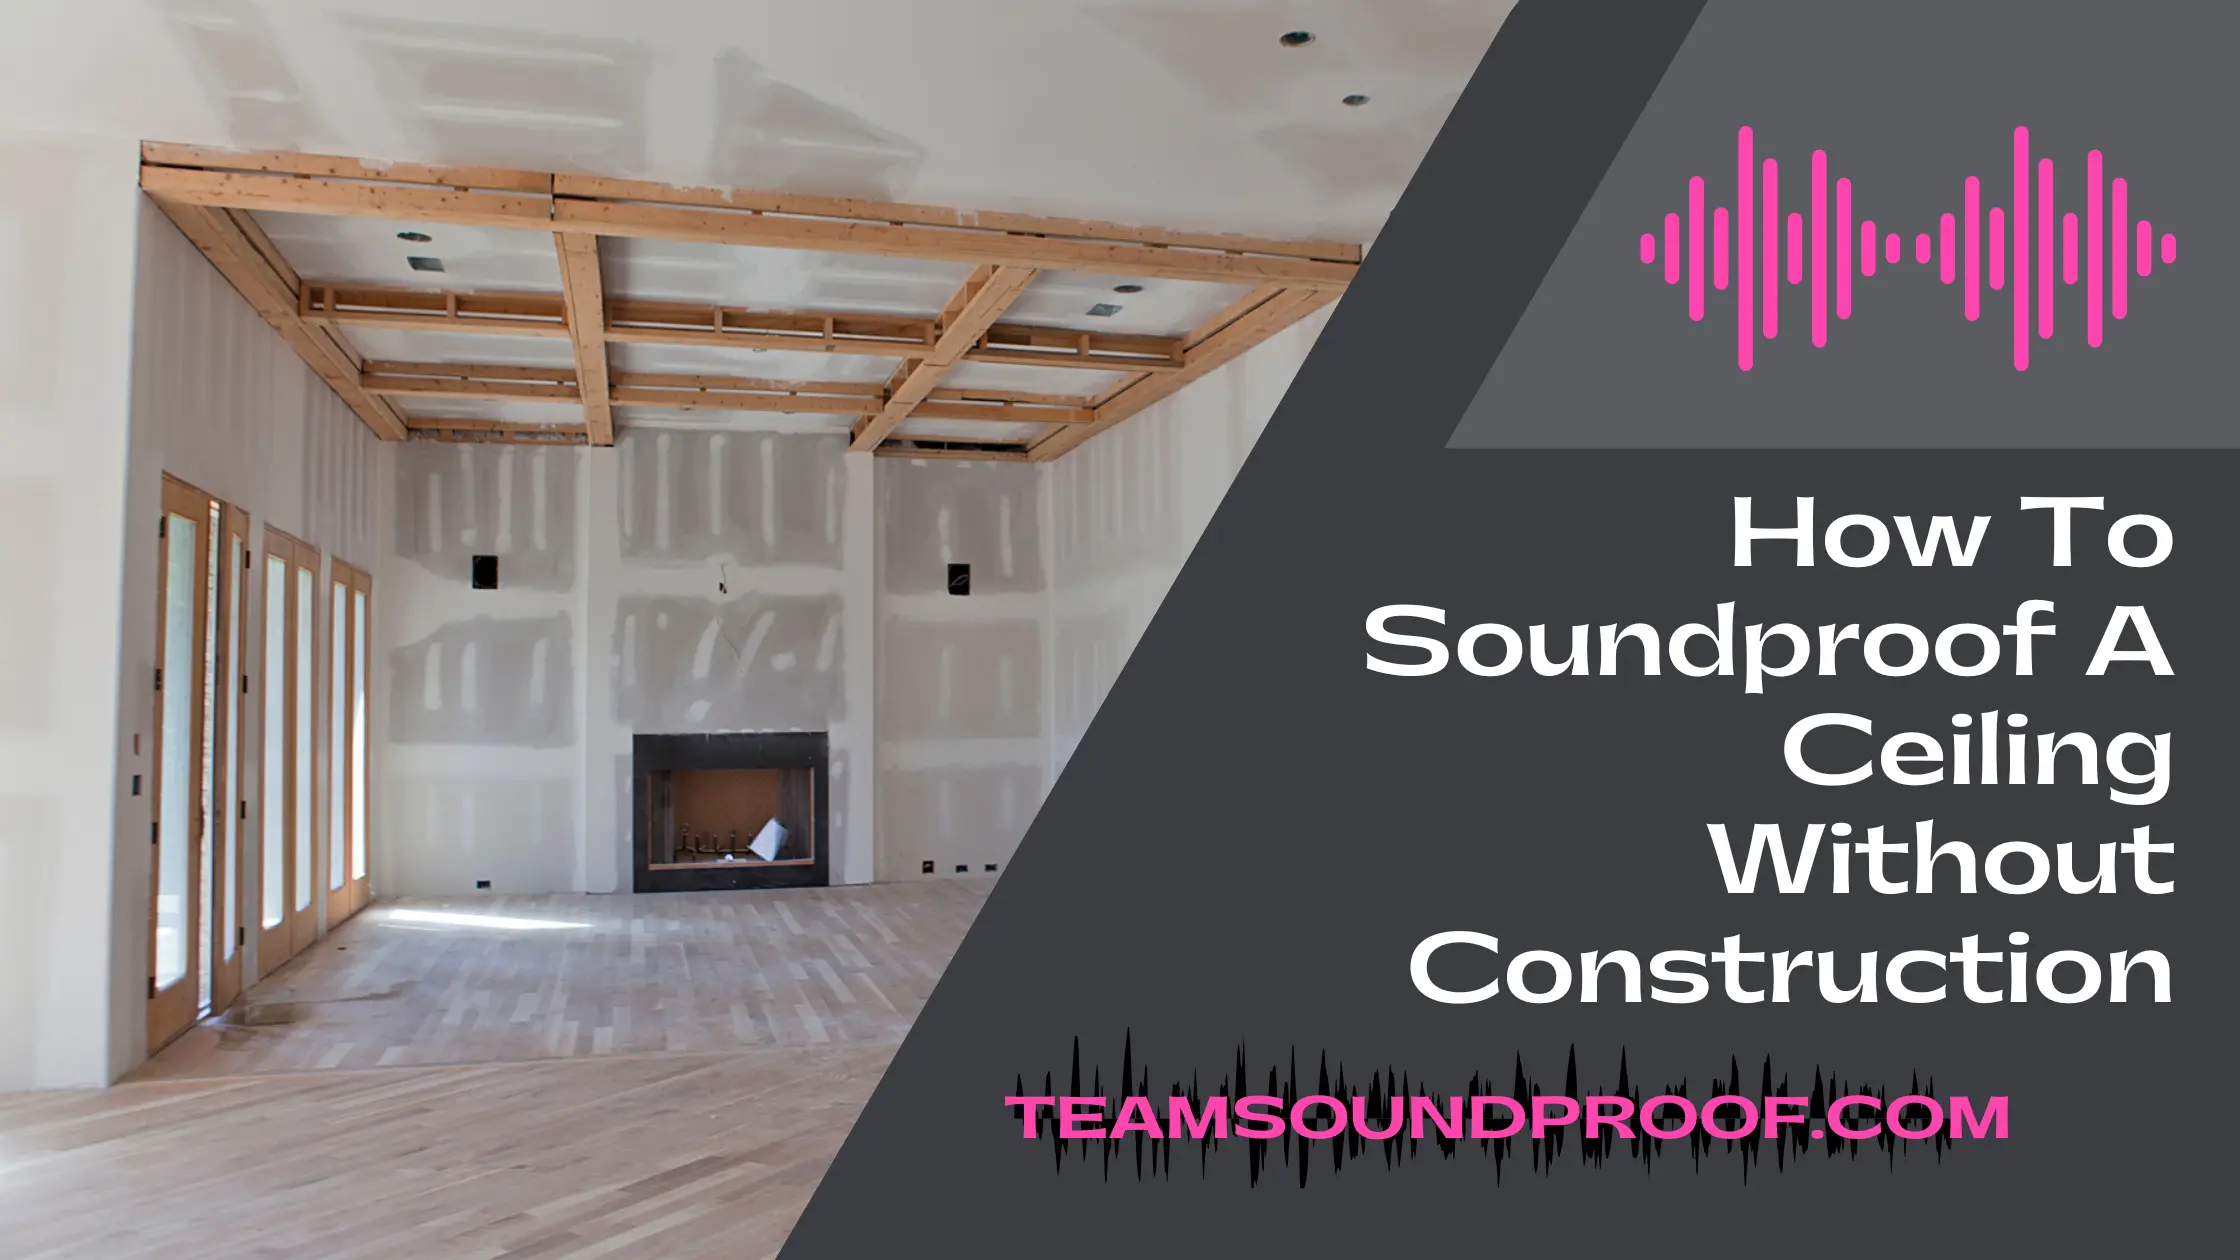 How To Soundproof A Ceiling Without Construction